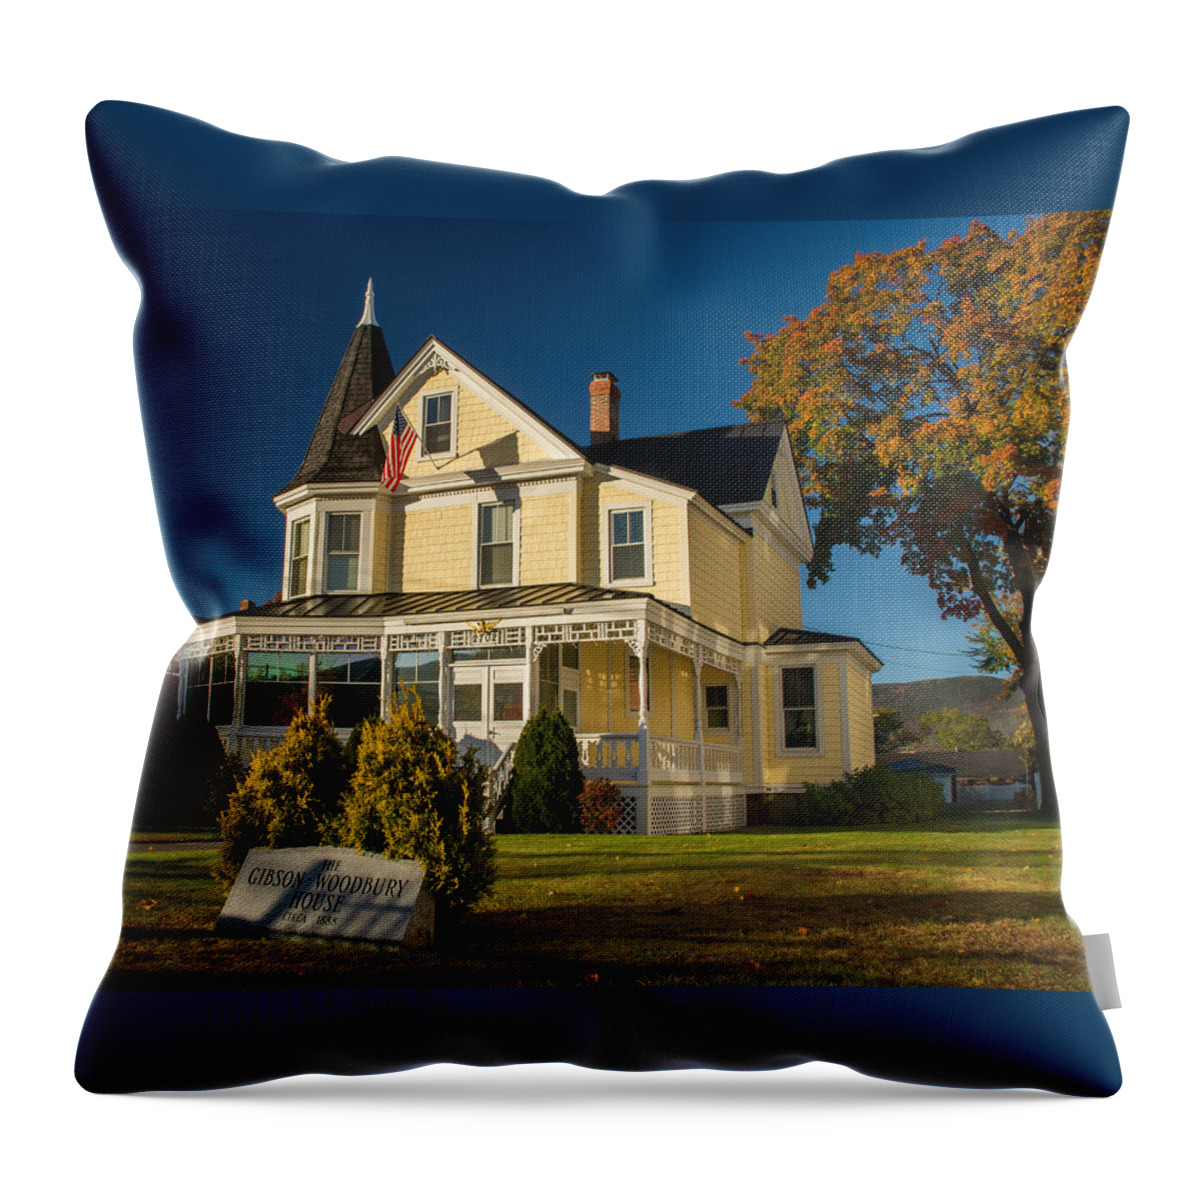 Gibson-woodbury House Throw Pillow featuring the photograph Gibson Woodbury House North Conway by Nancy De Flon